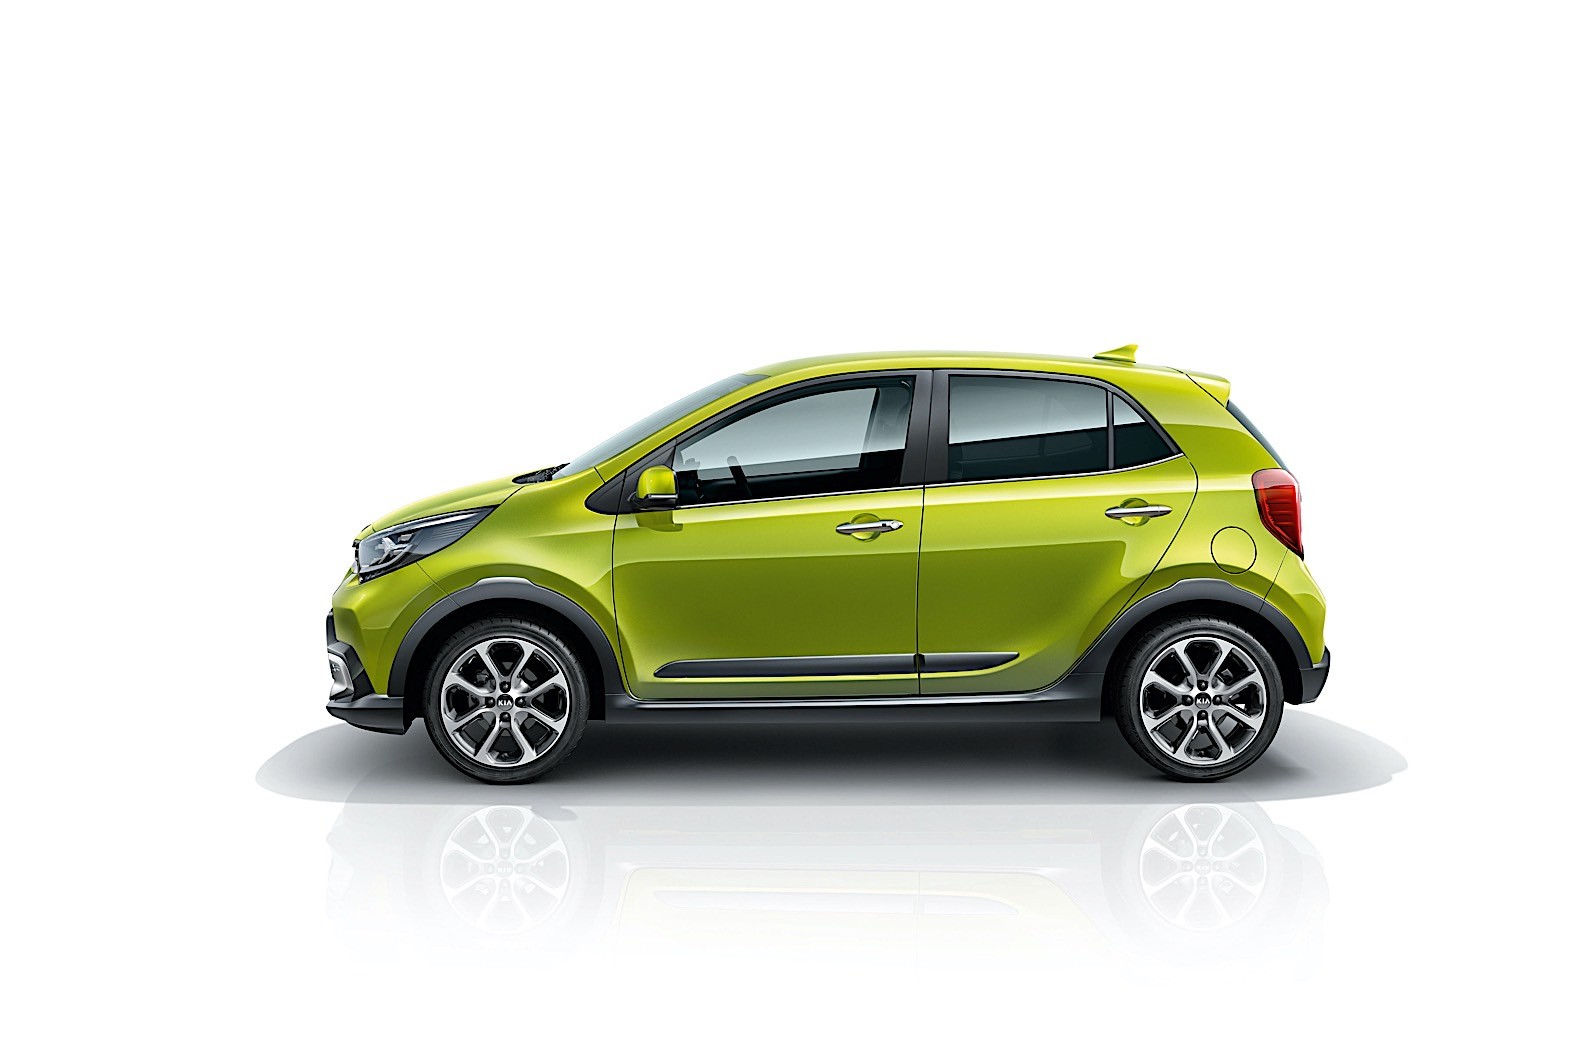 2021 Kia Picanto Gets Spicy with New Looks and Automated